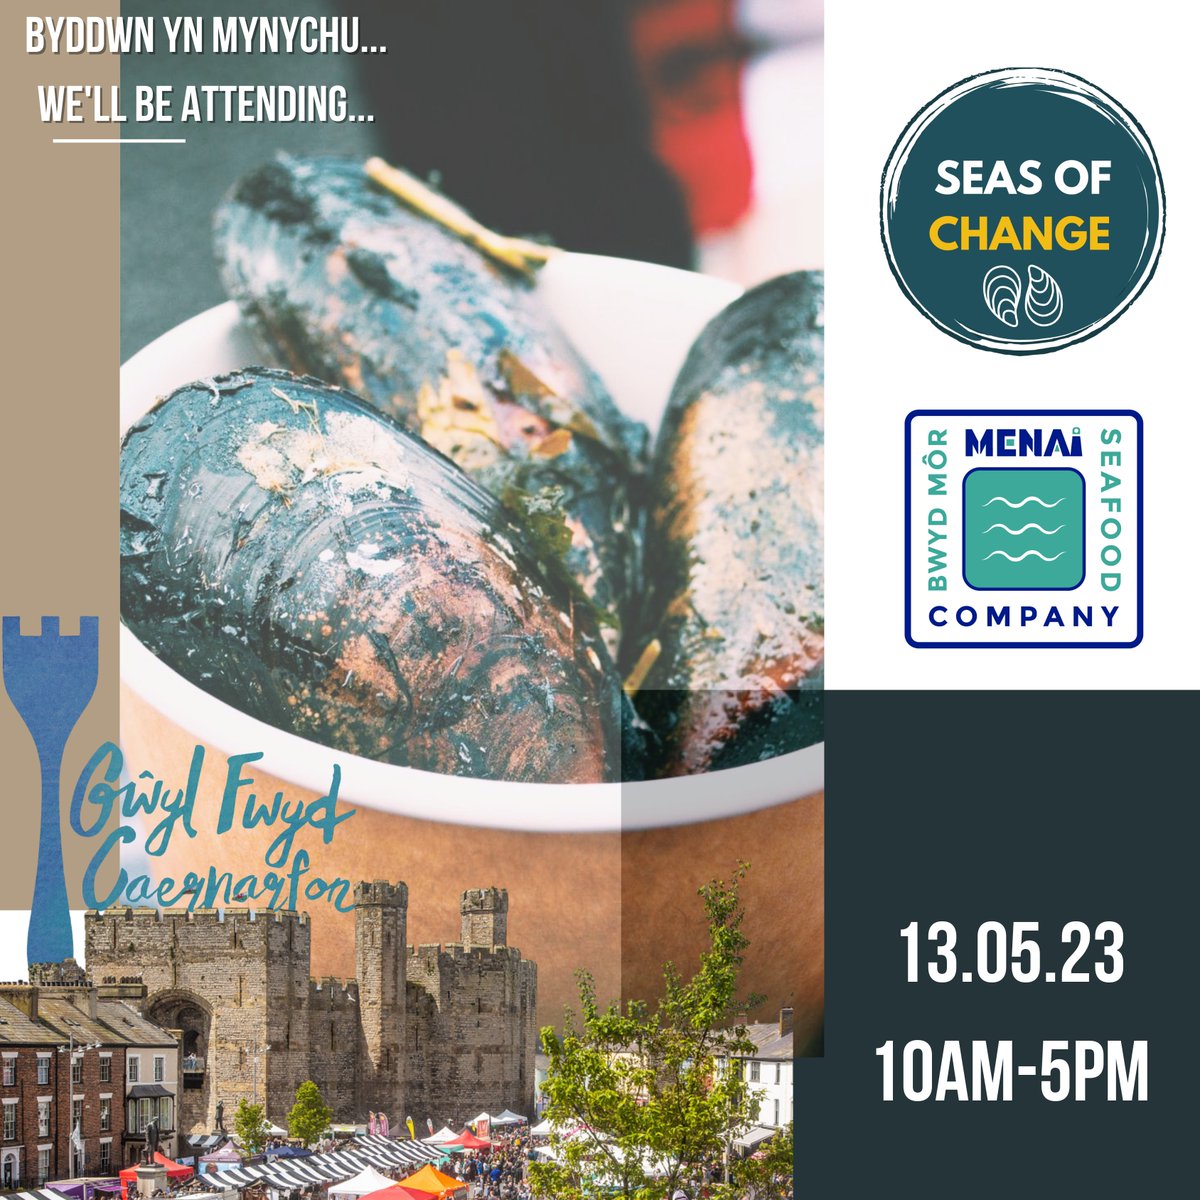 This Saturday, Seas Of Change and Meani Seafood Company will join forces to attend the Gŵyl Fwyd Caernarfon, where we'll be engaging with the public about our exciting collaborative project #foodsustainability #mussels #bwydcymru